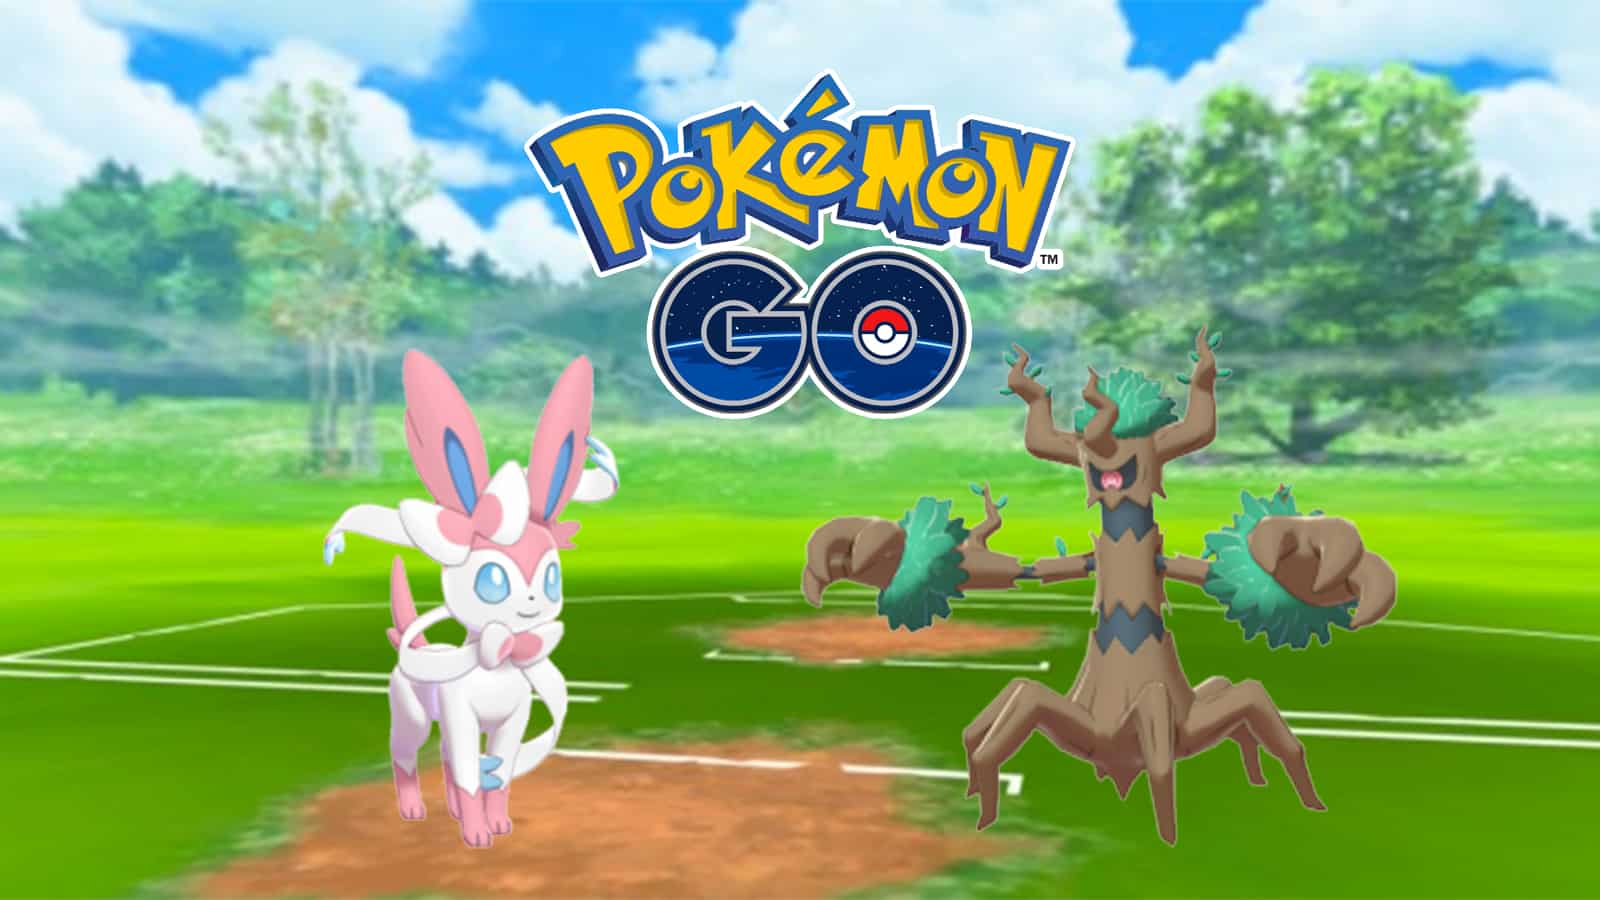 Sylveon and Trevenant as part of the best team for the Pokemon Go Ultra League Premier Classic